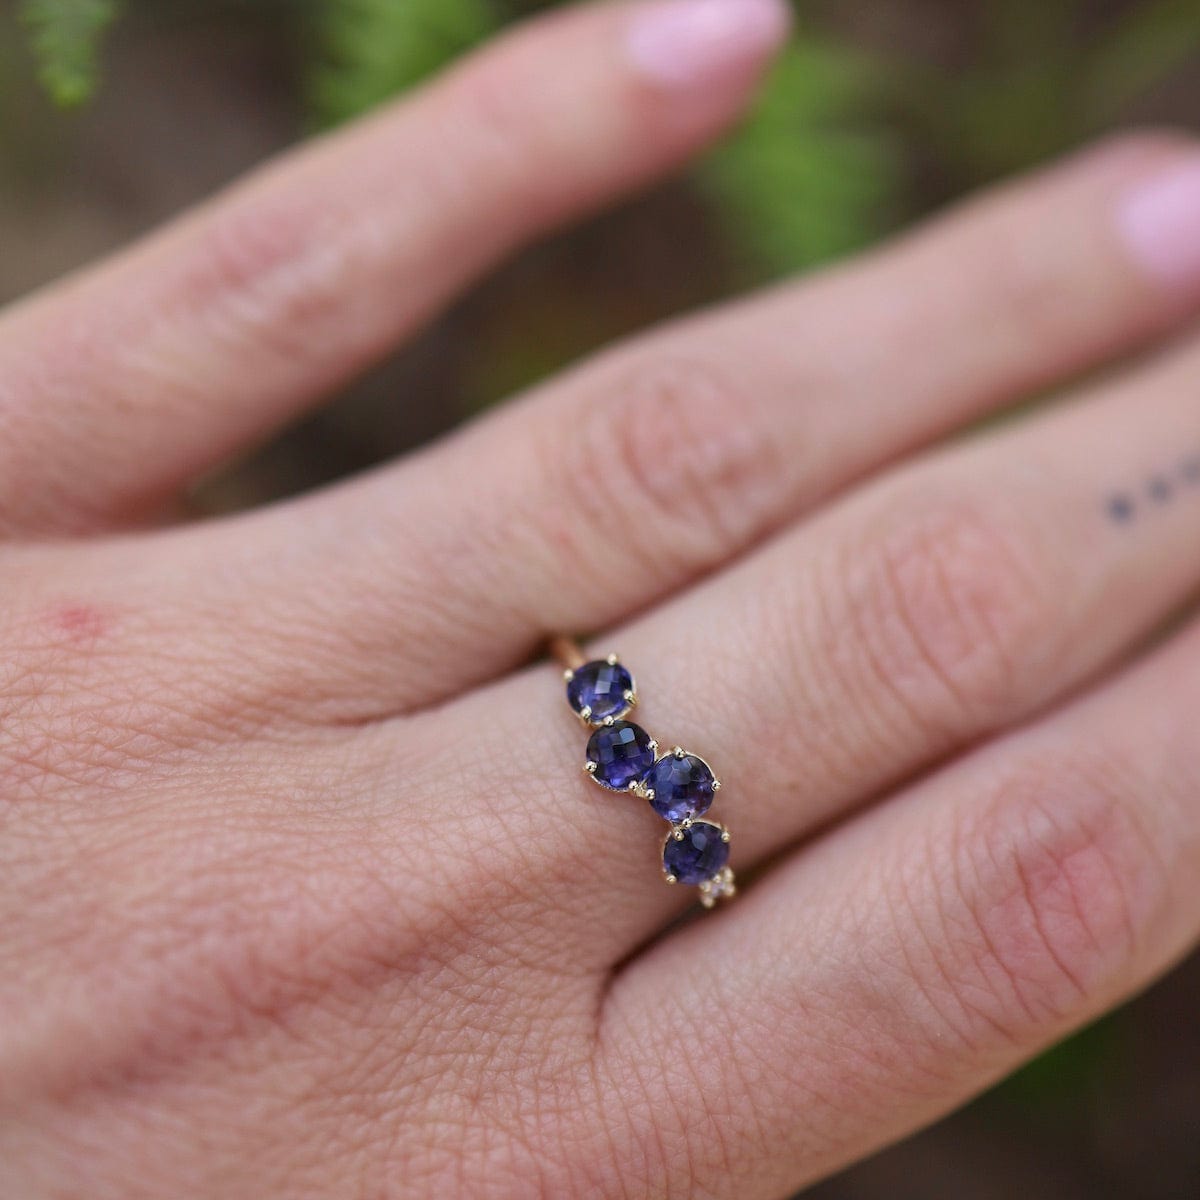 Amazon.com: 925 Sterling Silver Ring | Natural Iolite Peridot Gemstone Ring  for Women |Natural Gemstone Ring for Girls | Engagement Ring, Astrological  Ring, Statement Ring, Iolite Peridot Ring | Ring Size 8 US